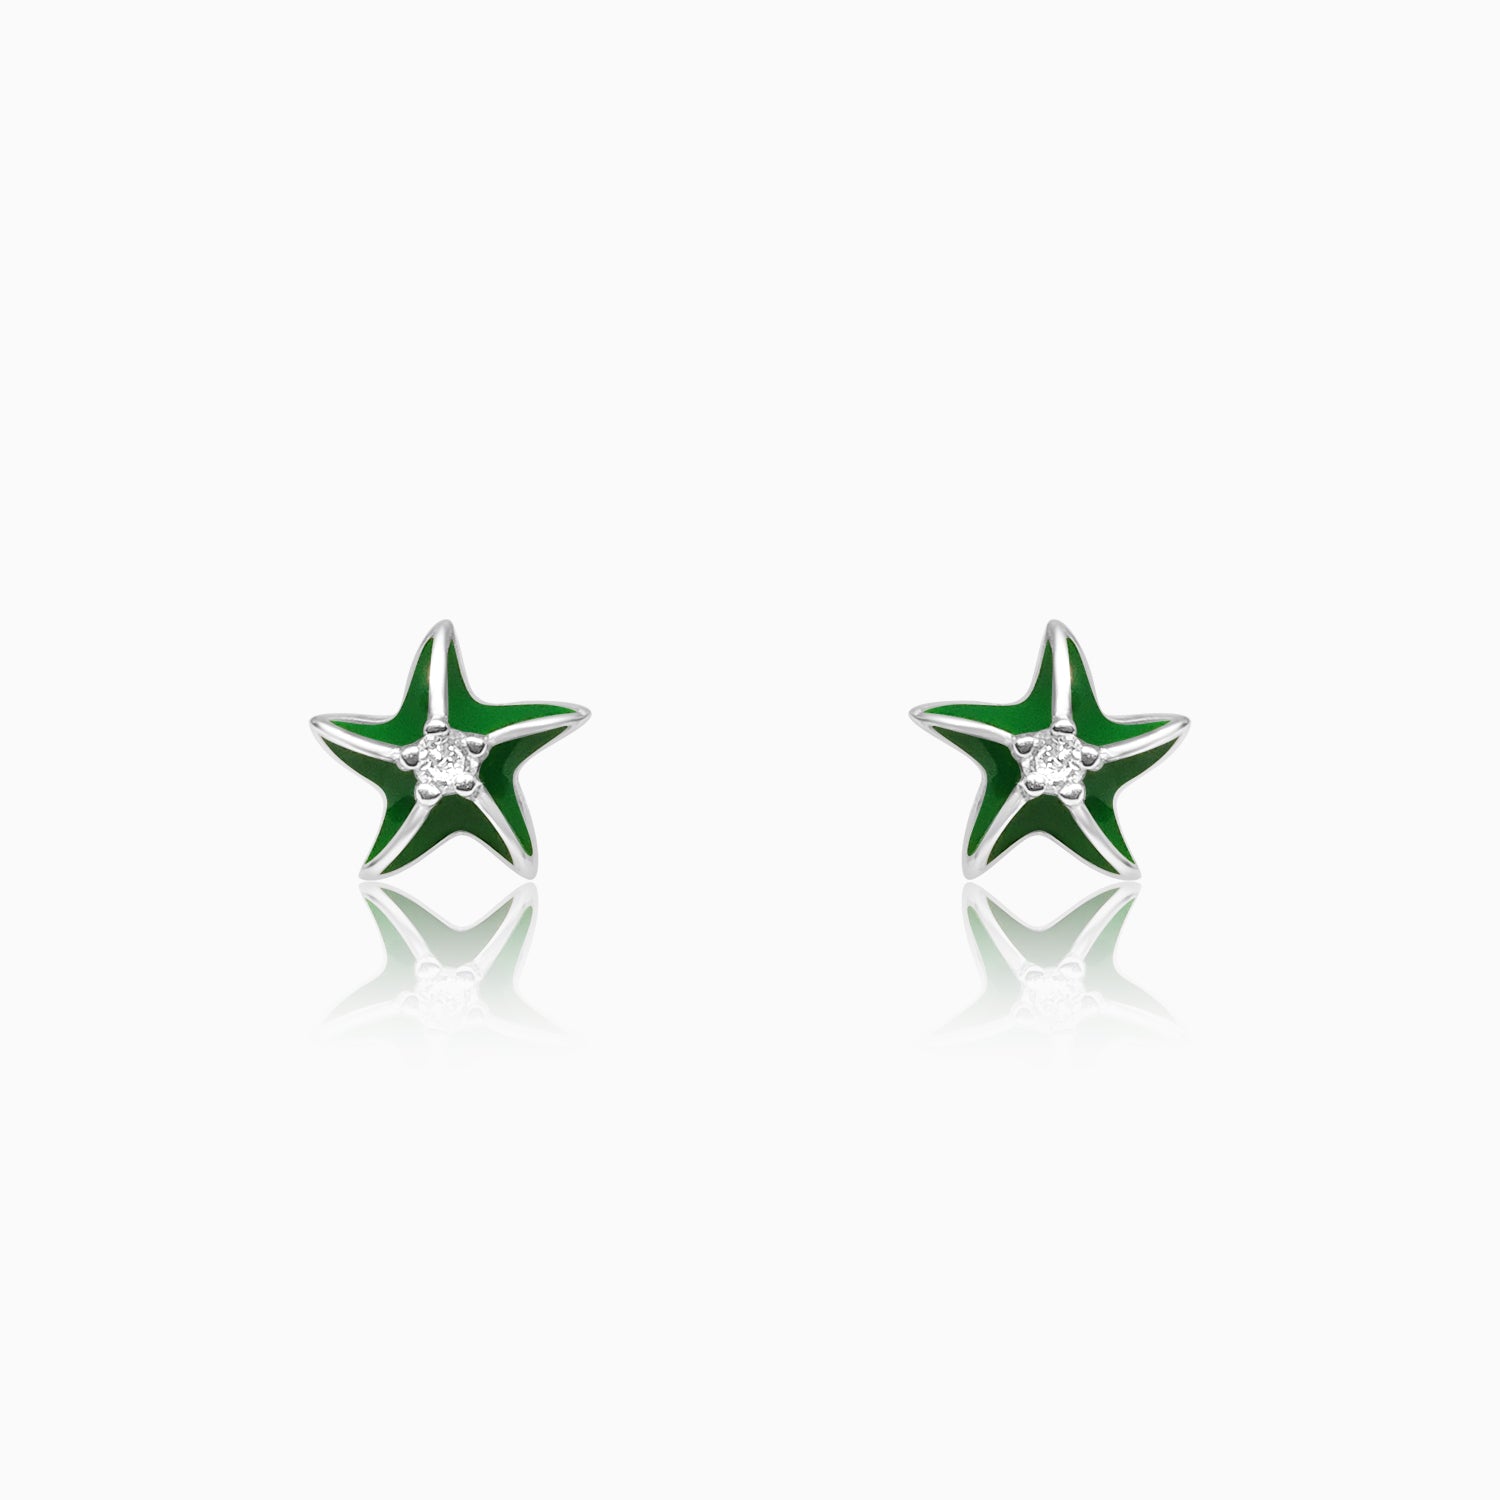 Silver Sparkle on Green Star Fish Earrings